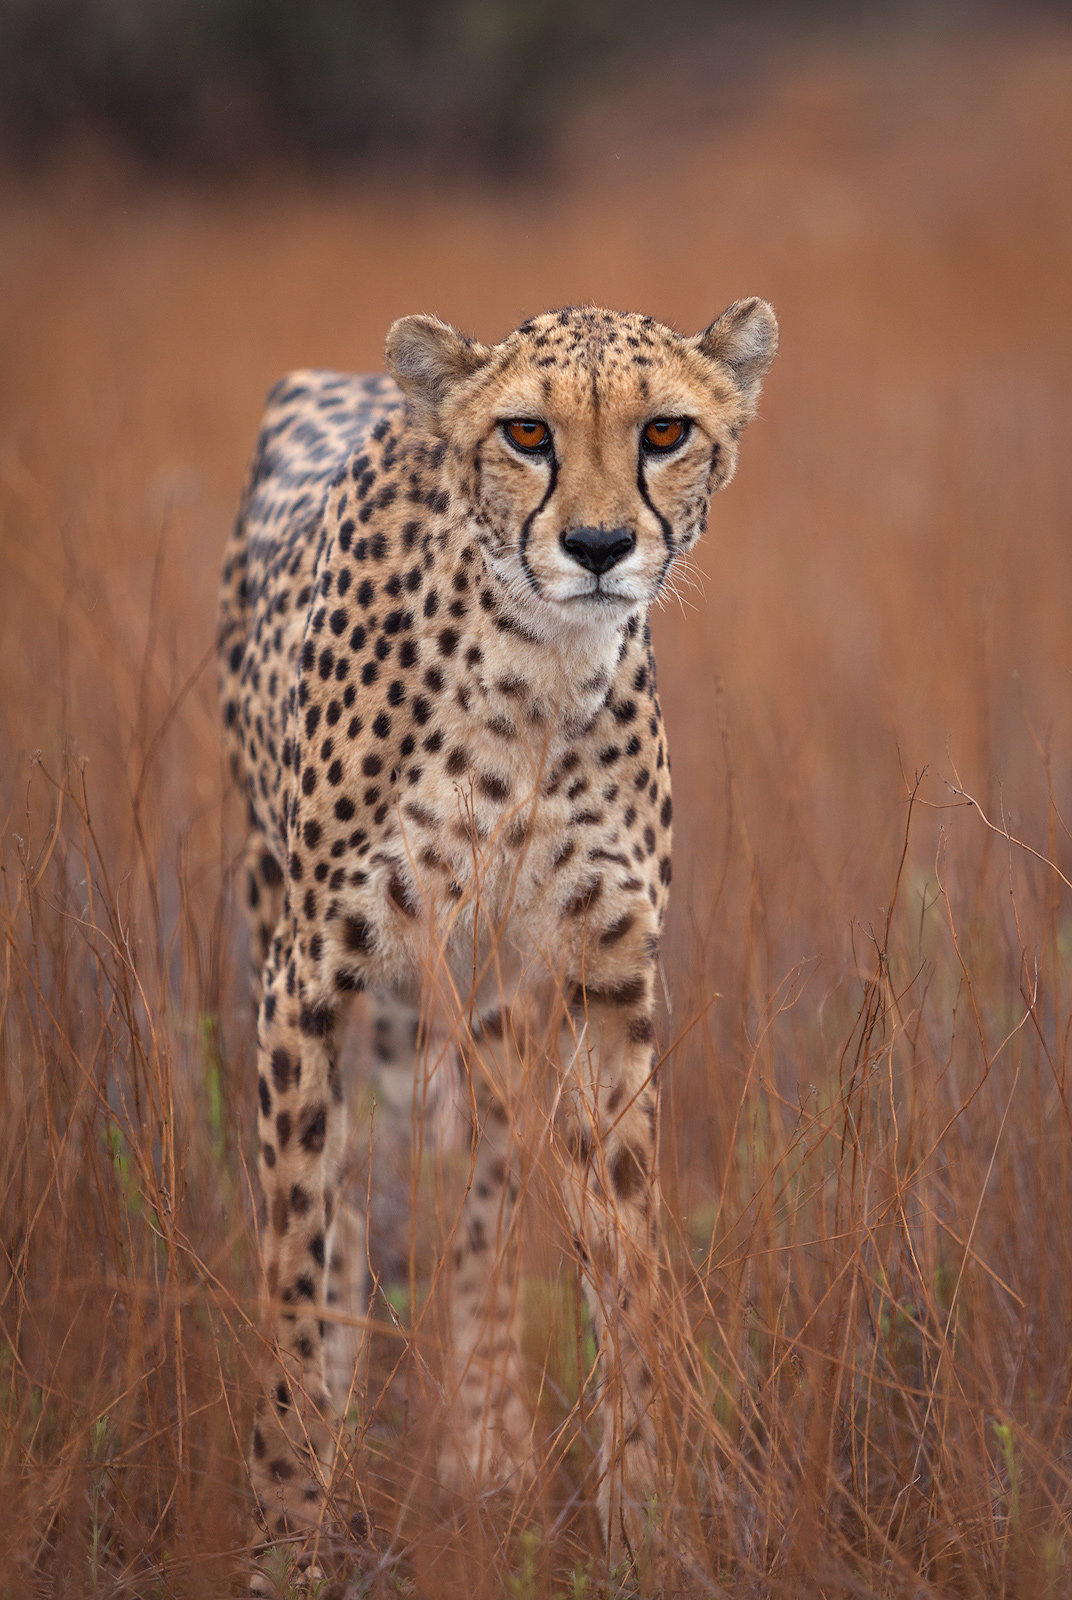 A cheetah in a field looking intently at the camera